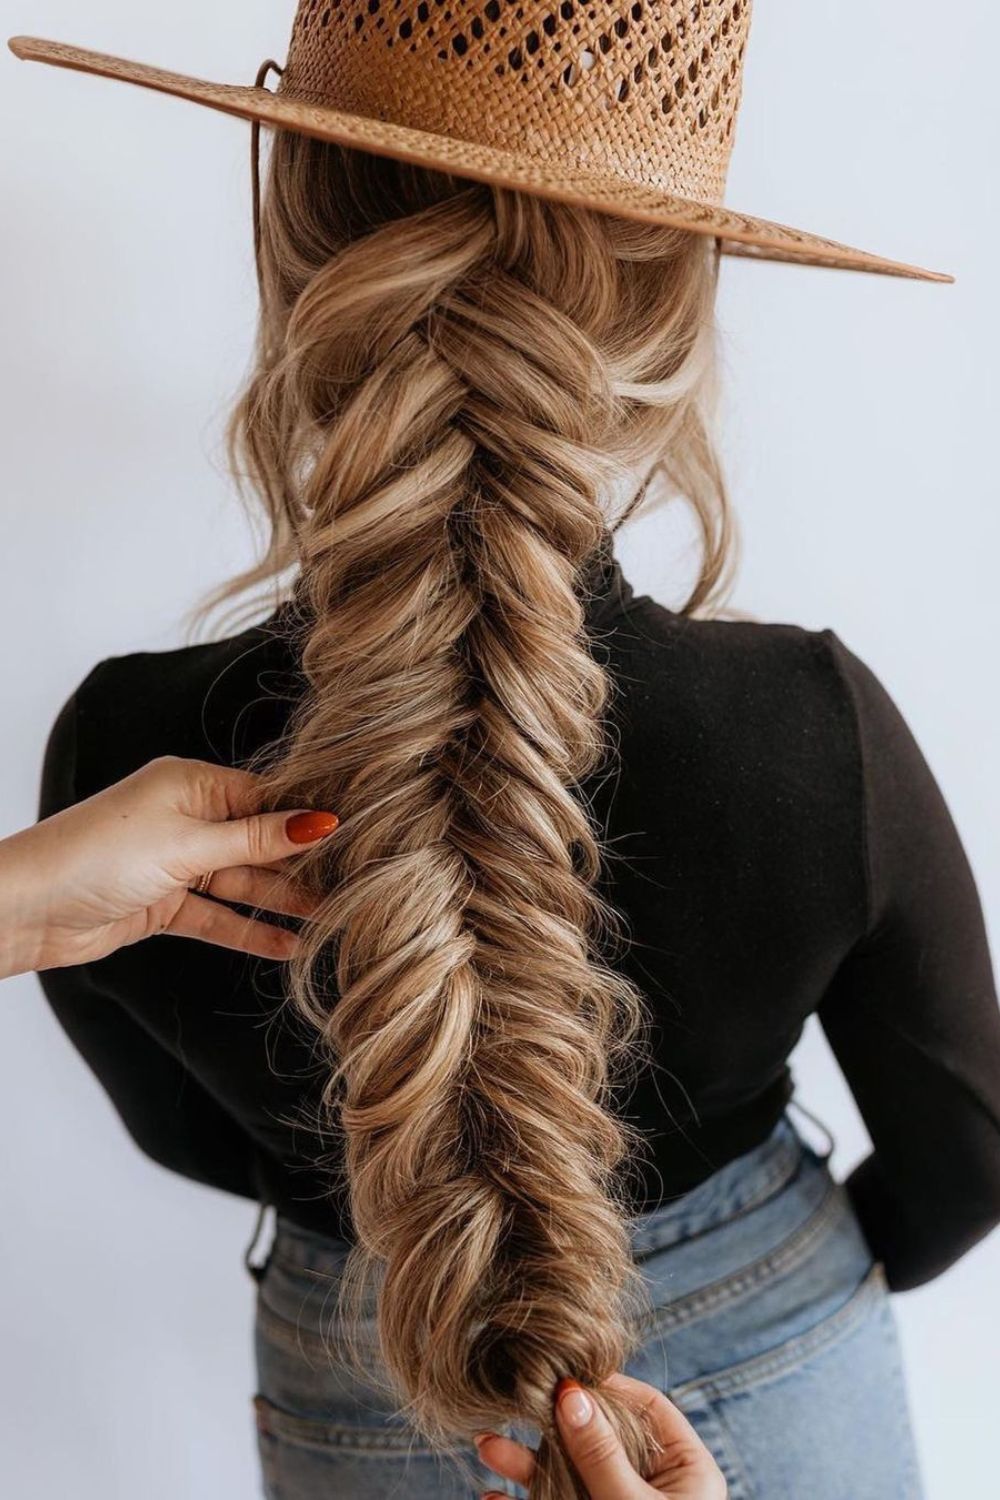 A woman with a long blonde fishtail braid.